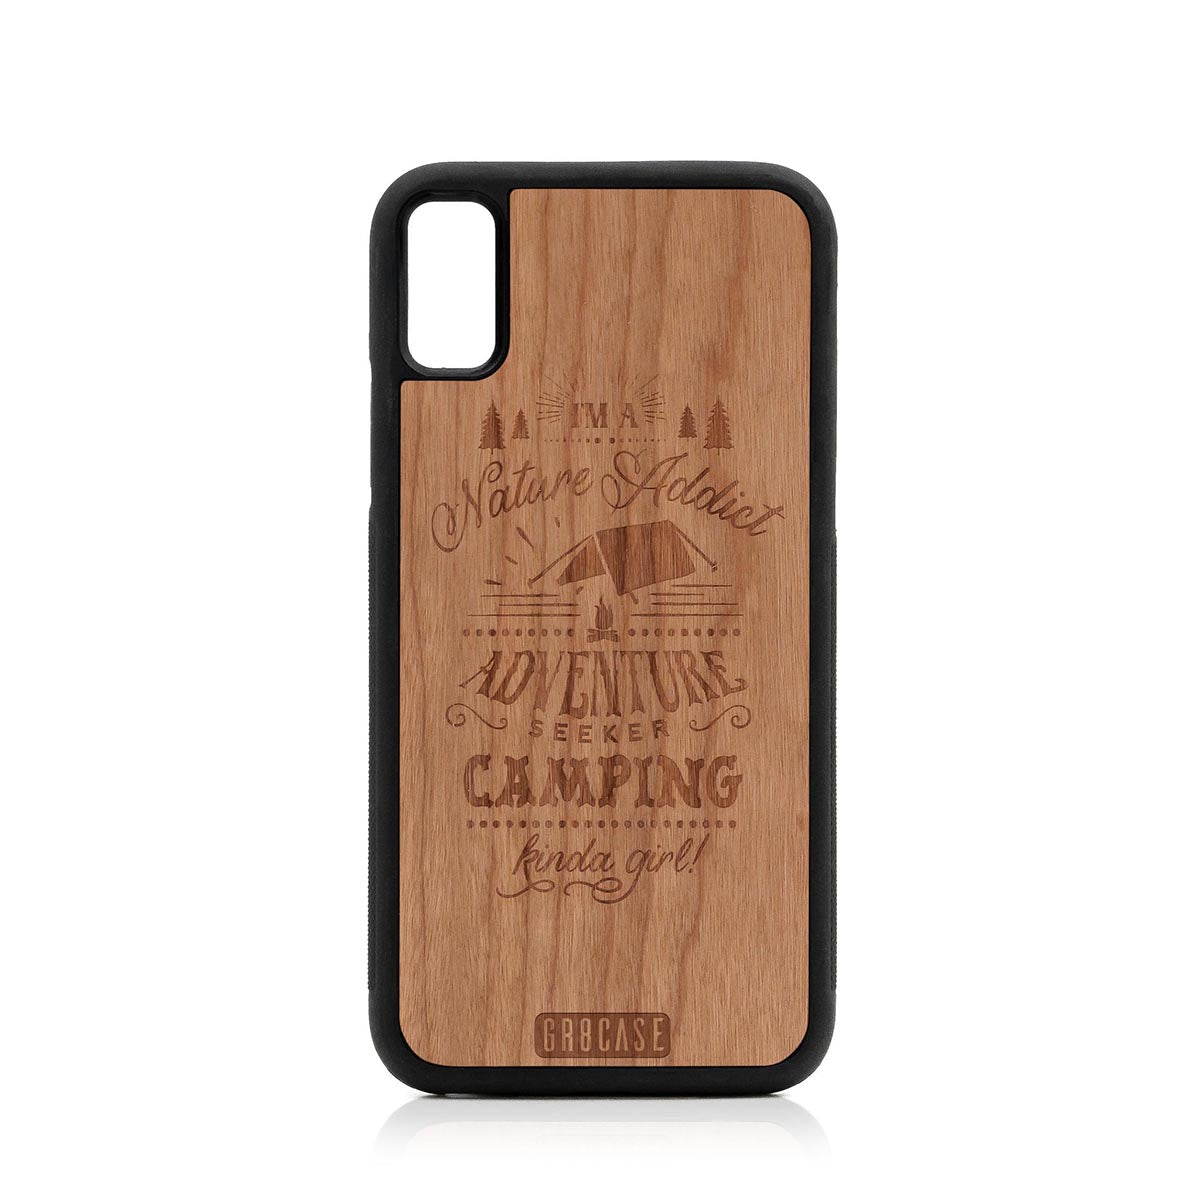 I'm A Nature Addict Adventure Seeker Camping Kinda Girl Design Wood Case For iPhone XR by GR8CASE